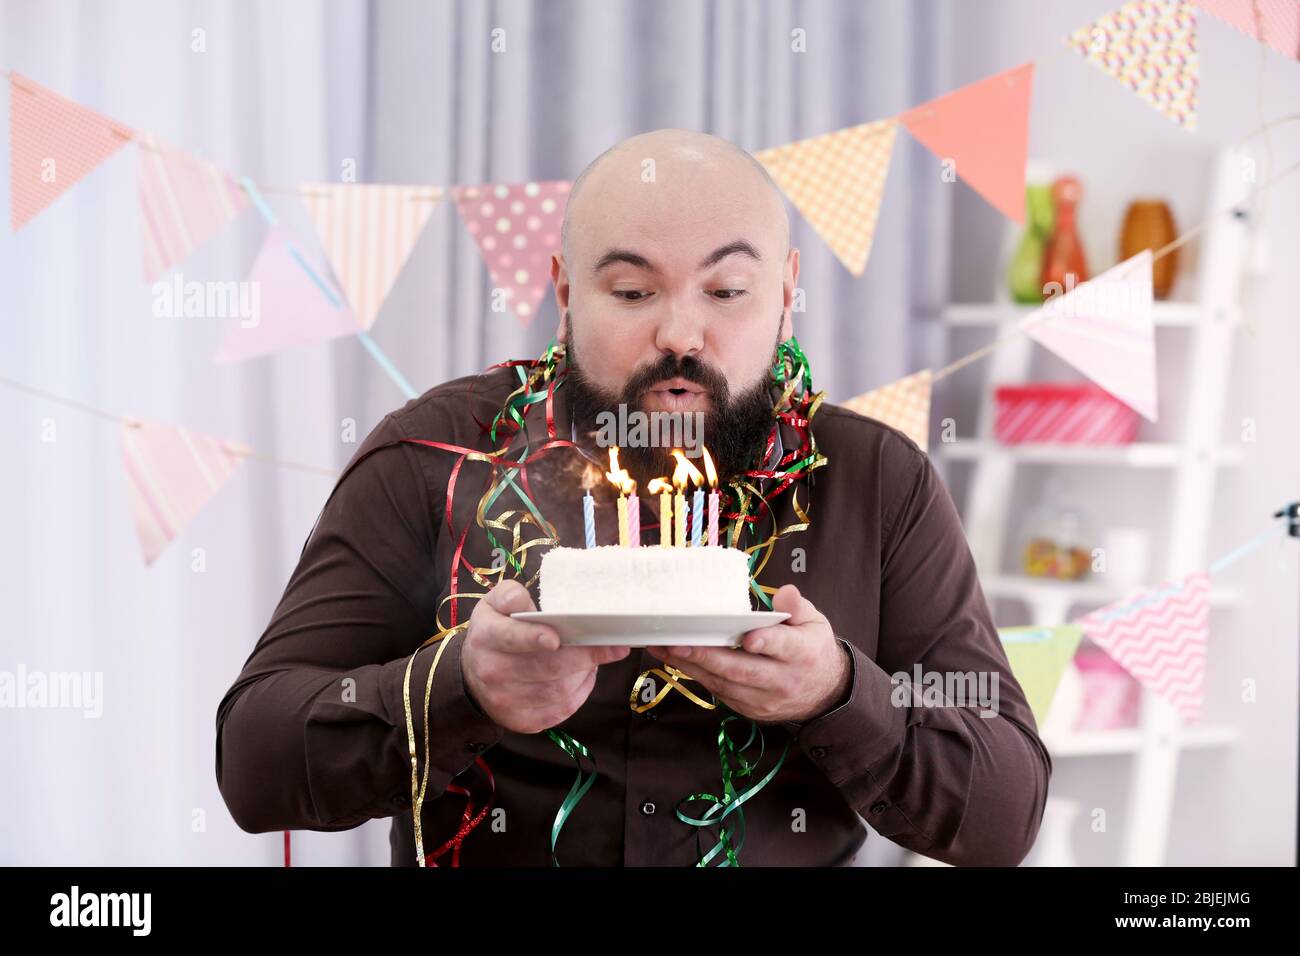 Funny fat man blowing out candles on birthday cake at party Stock Photo -  Alamy